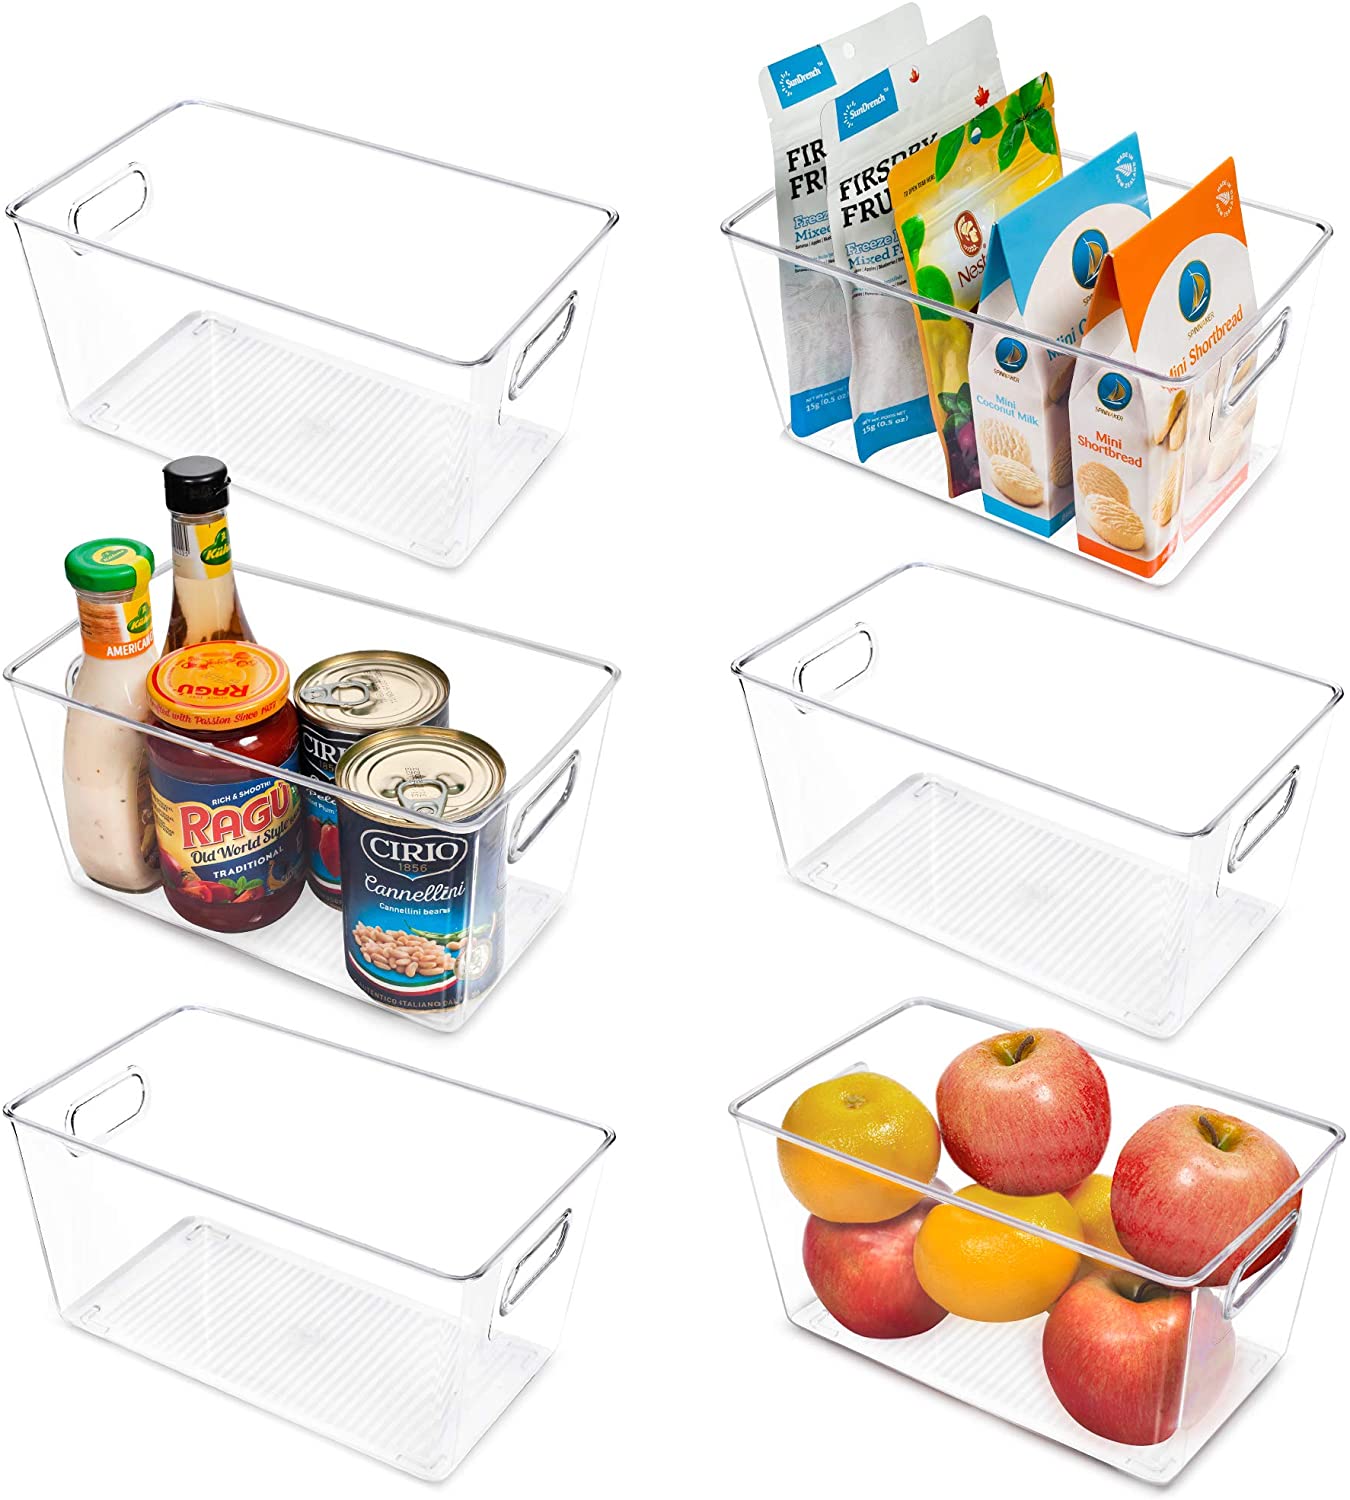 Vtopmart 10 PCS Clear Plastic Storage Bins, Pantry Organizer Containers  with Handle for Refrigerator, Fridge, Cabinet, Kitchen, Countertops,  Cupboard